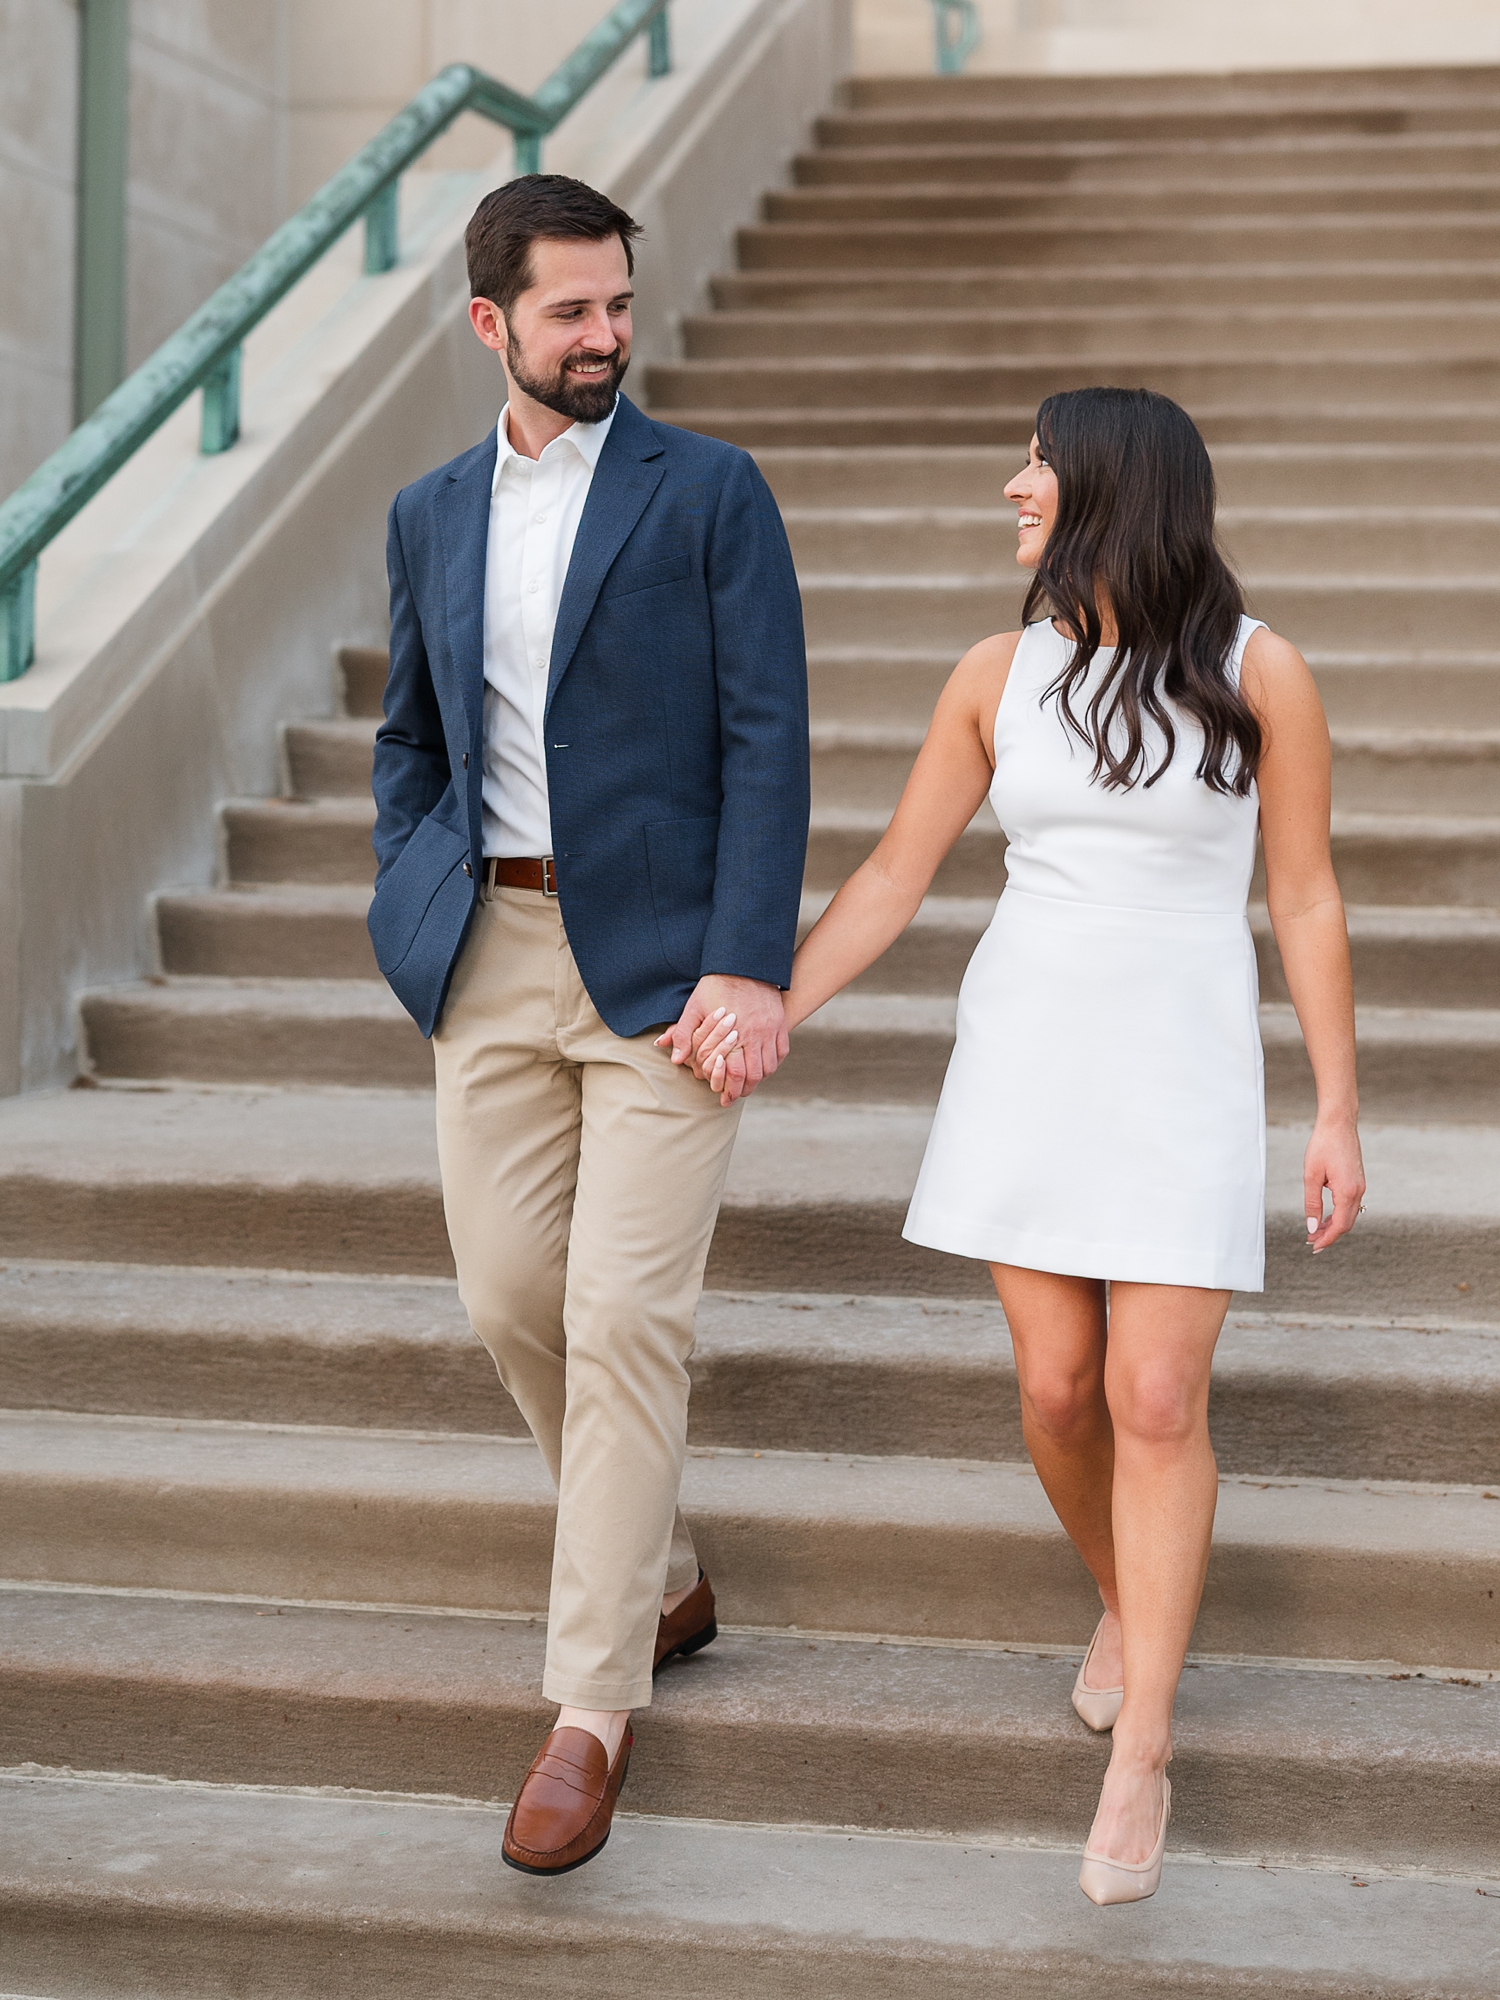 Downtown Indianapolis Sunset Engagement Session by Indiana Wedding Photographer Courtney Rudicel